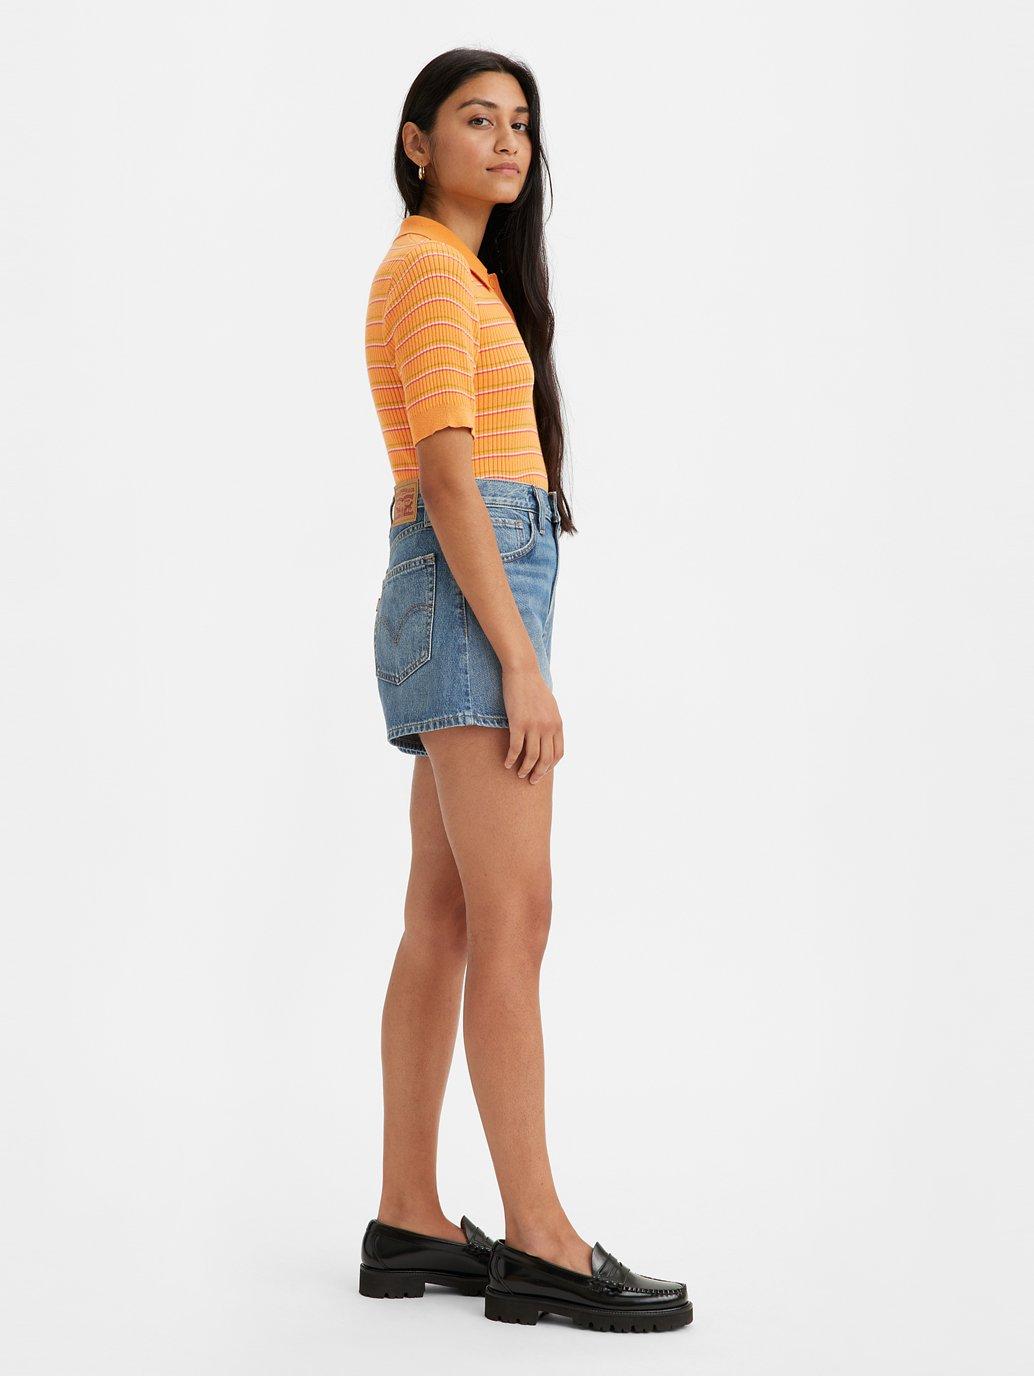 Buy Levi's® Women's High-Waisted Mom Shorts | Levi’s® Official Online ...